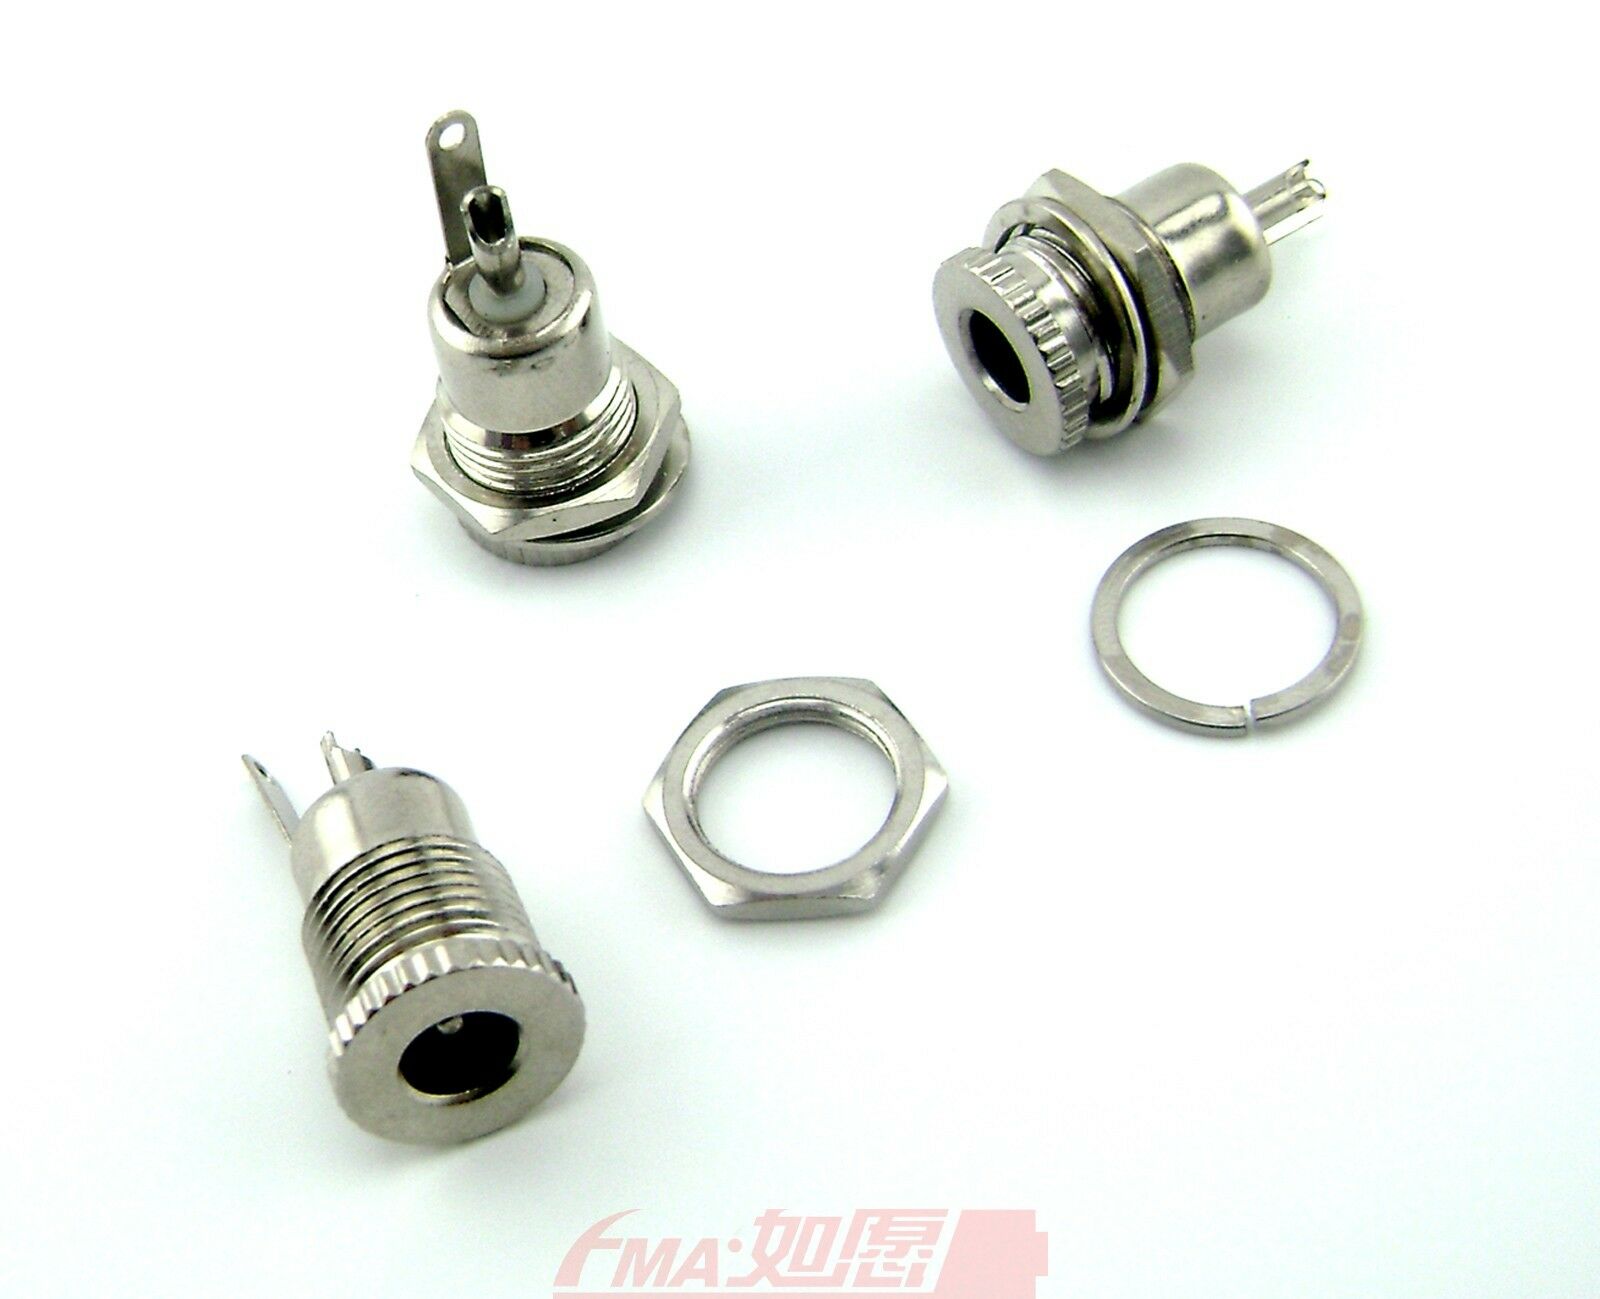 30Sets of DC5.5/2.5mm Socket Connector for output connection full Metal Material